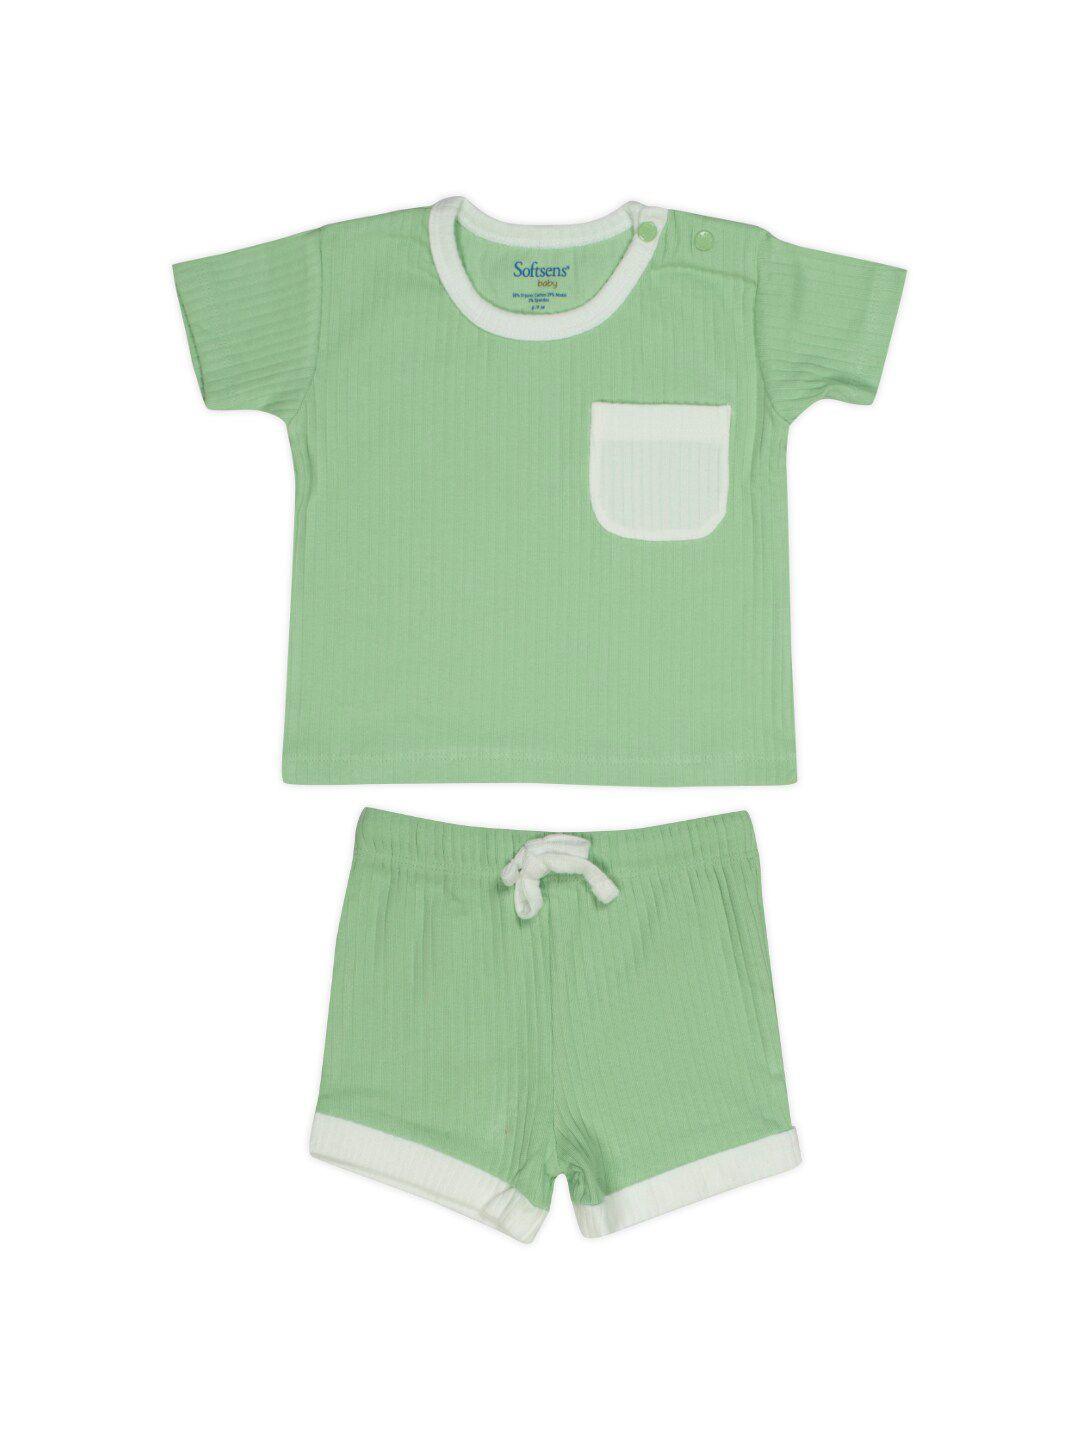 softsens kids top with shorts